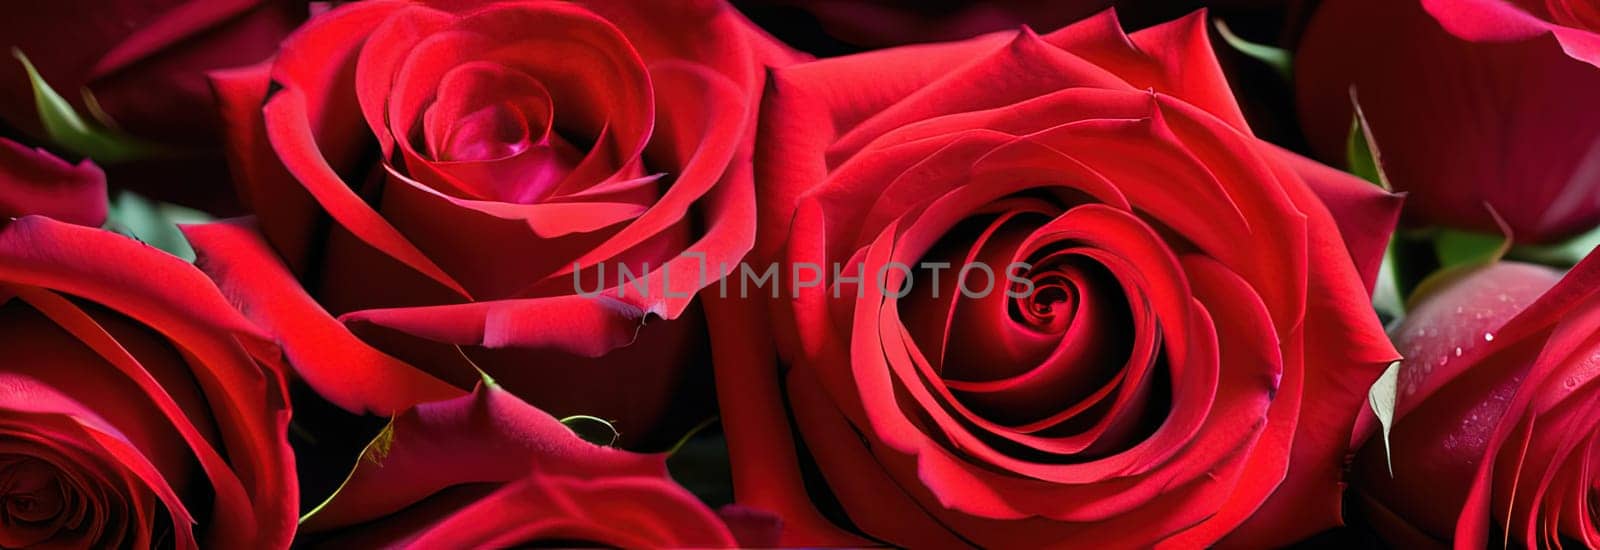 Beautiful banner with red roses background of Mothers, Valentine Day, Birthday, Anniversary, Wedding. Copy space. For advertisement, greeting card mockup, presentation, header, poster, website, print. by Angelsmoon